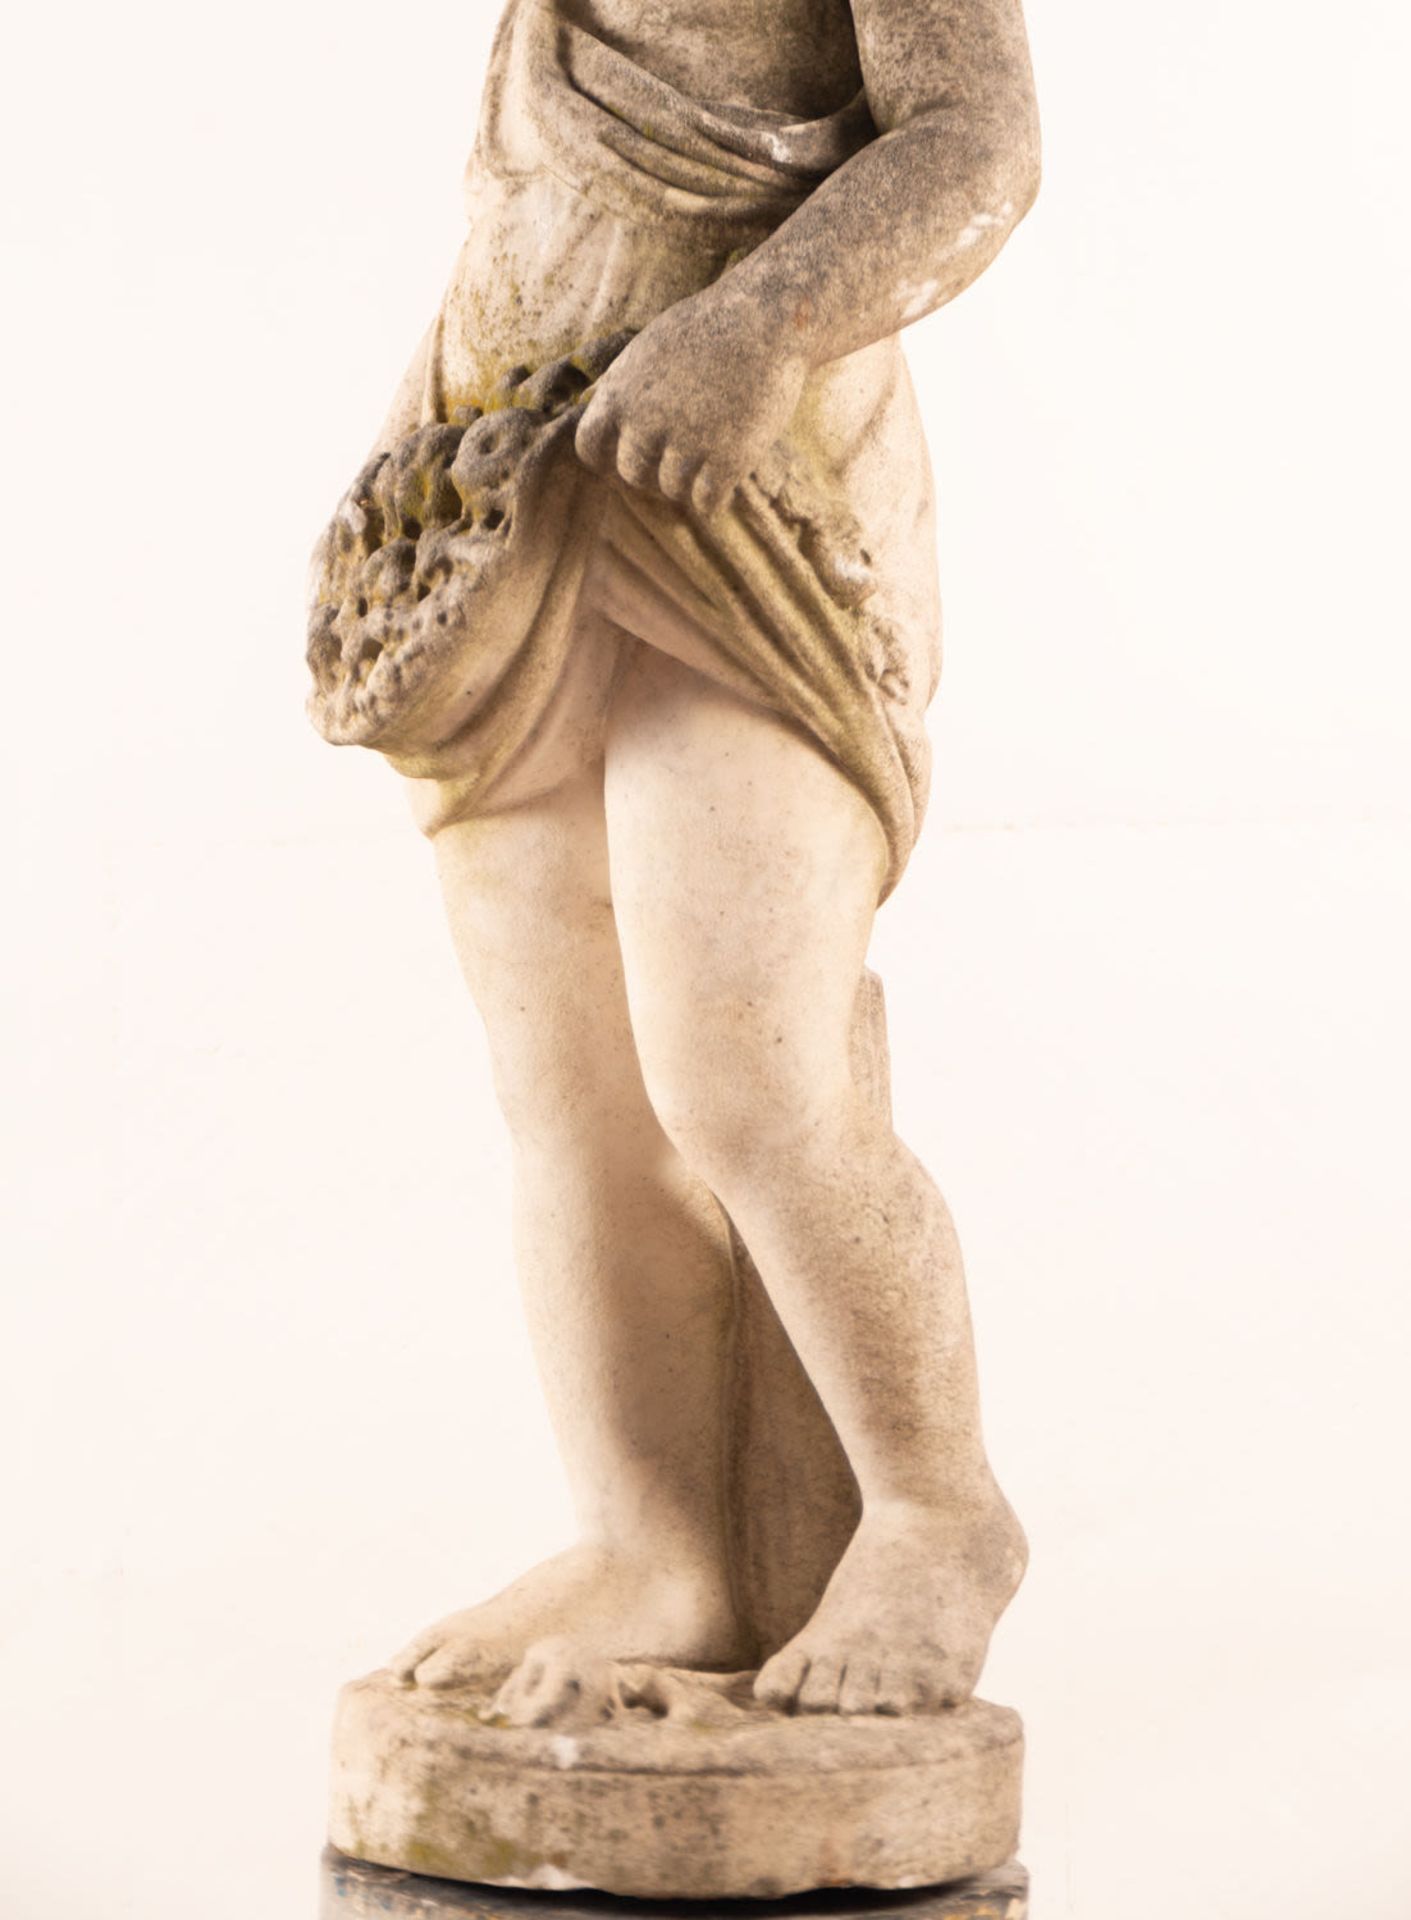 Large Cherub Figure in Marble, France, 18th century - Image 14 of 14